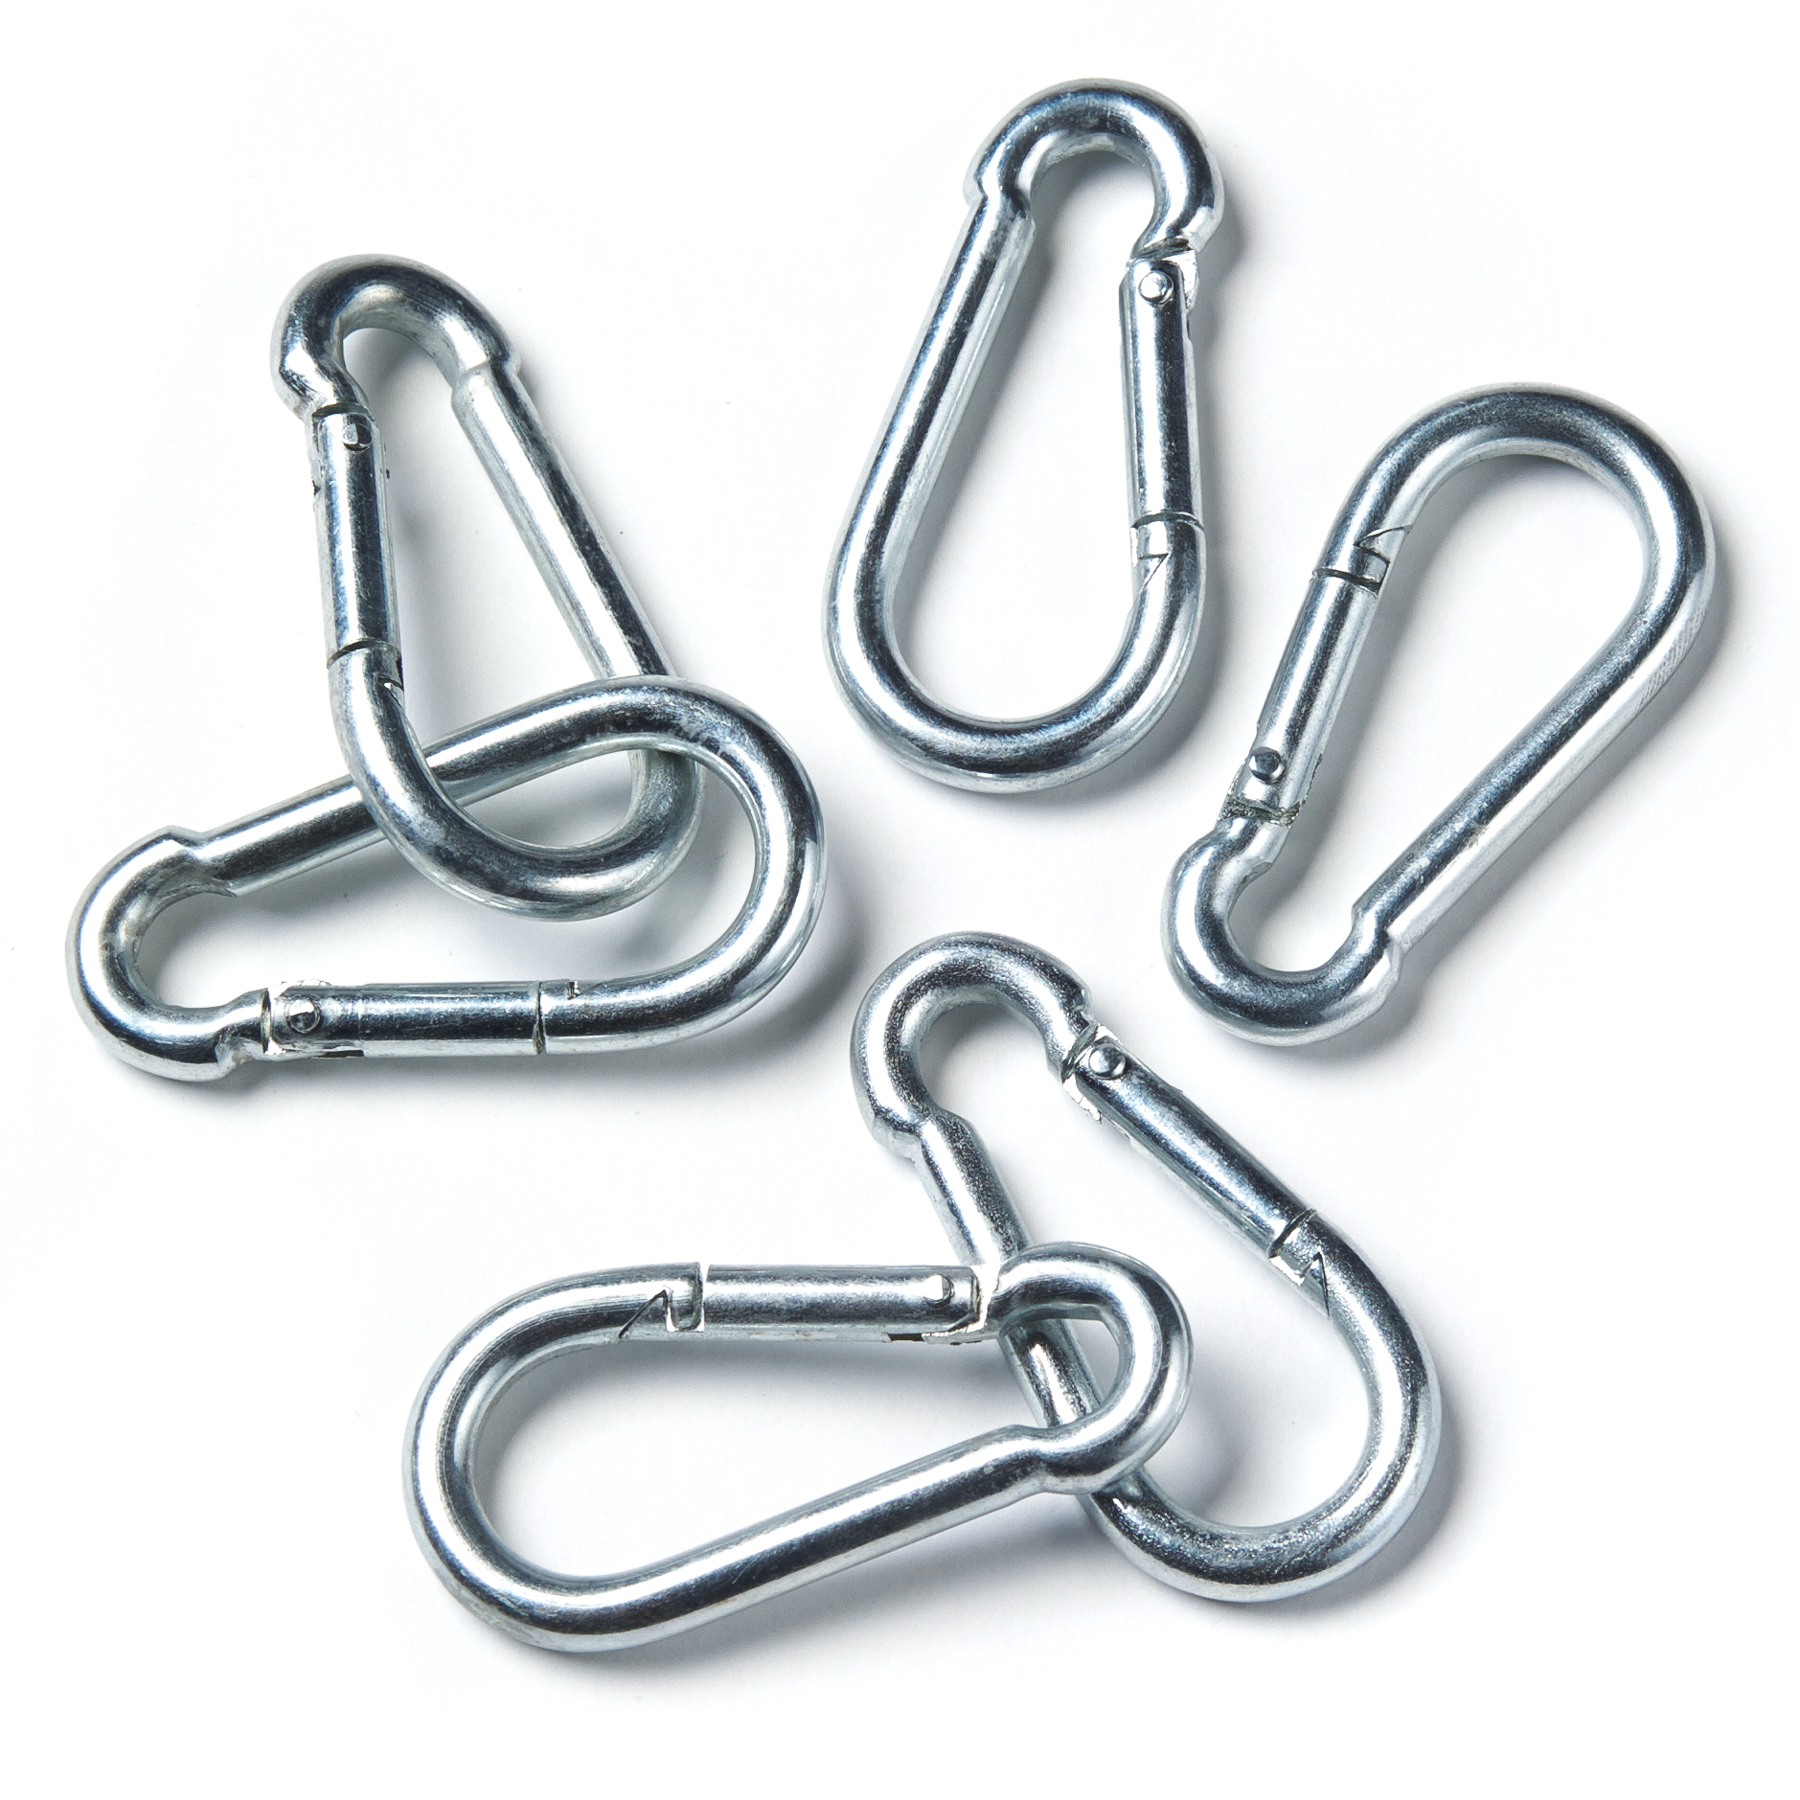 *Top Quality! Pack of 10 40mm Climbing Strong steel snap carabiner clip 